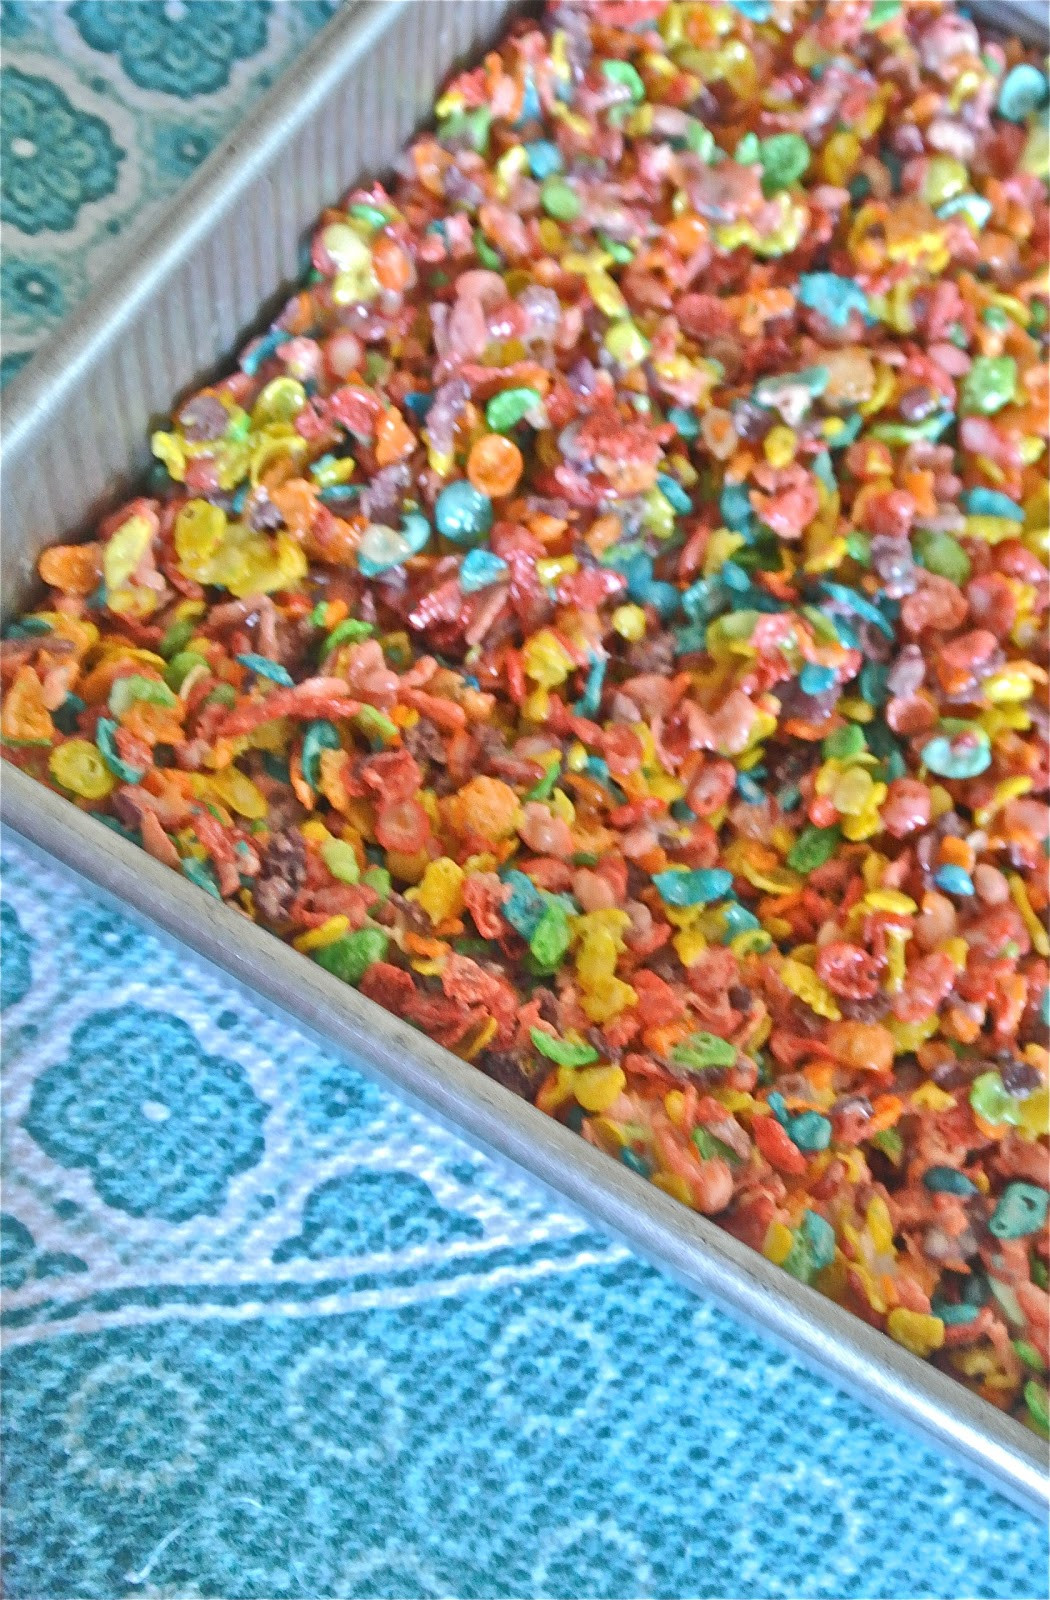 Fruity Pebbles Desserts
 The Barbee Housewife Fruity Pebbles Marshmallow Treats